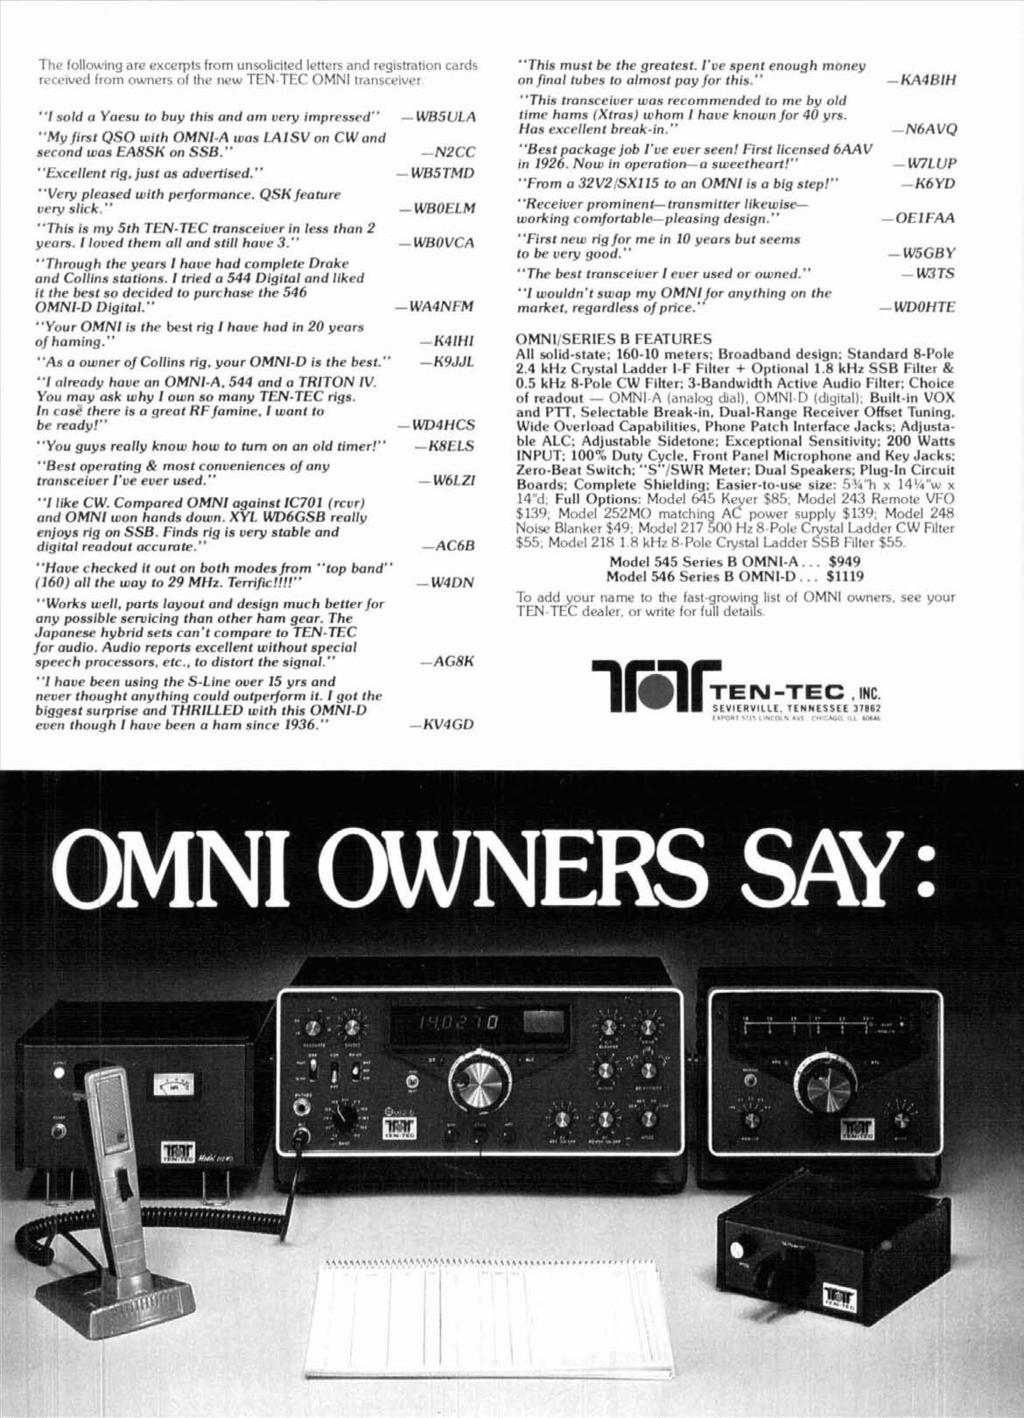 The follou,ing are excerpt* from unsollnted letters and registratton cards recc~ved from owners of the new TEN TtC OMNI transreiver "I sold a Yaesu to buy this and am very impressed" -WBJULA "MyJirst